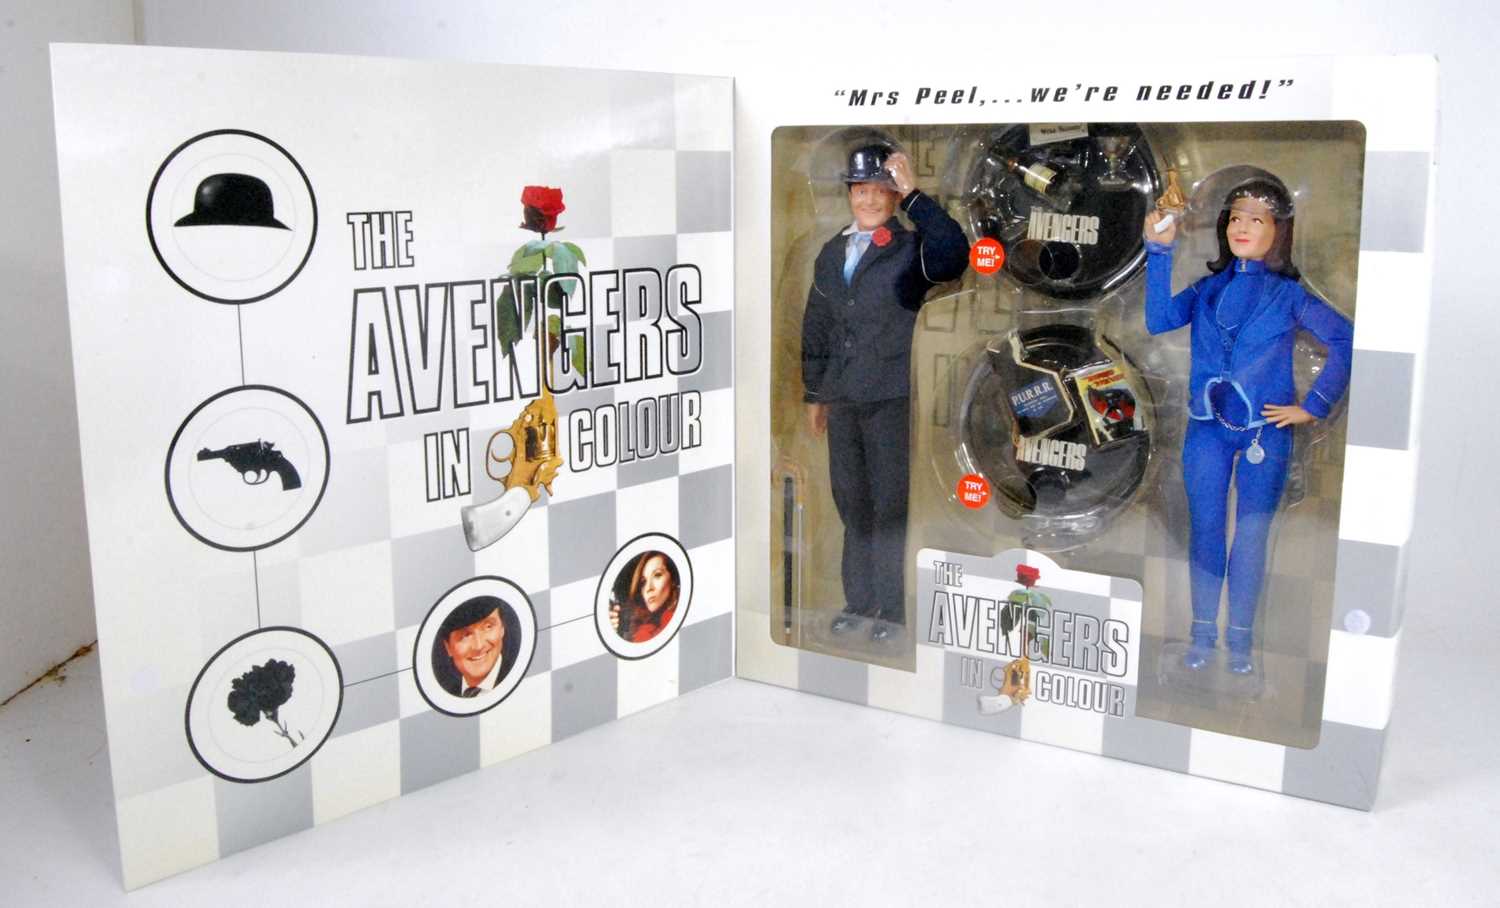 A Product Enterprise Limited boxed limited edition, The Avengers in Colour talking action figure